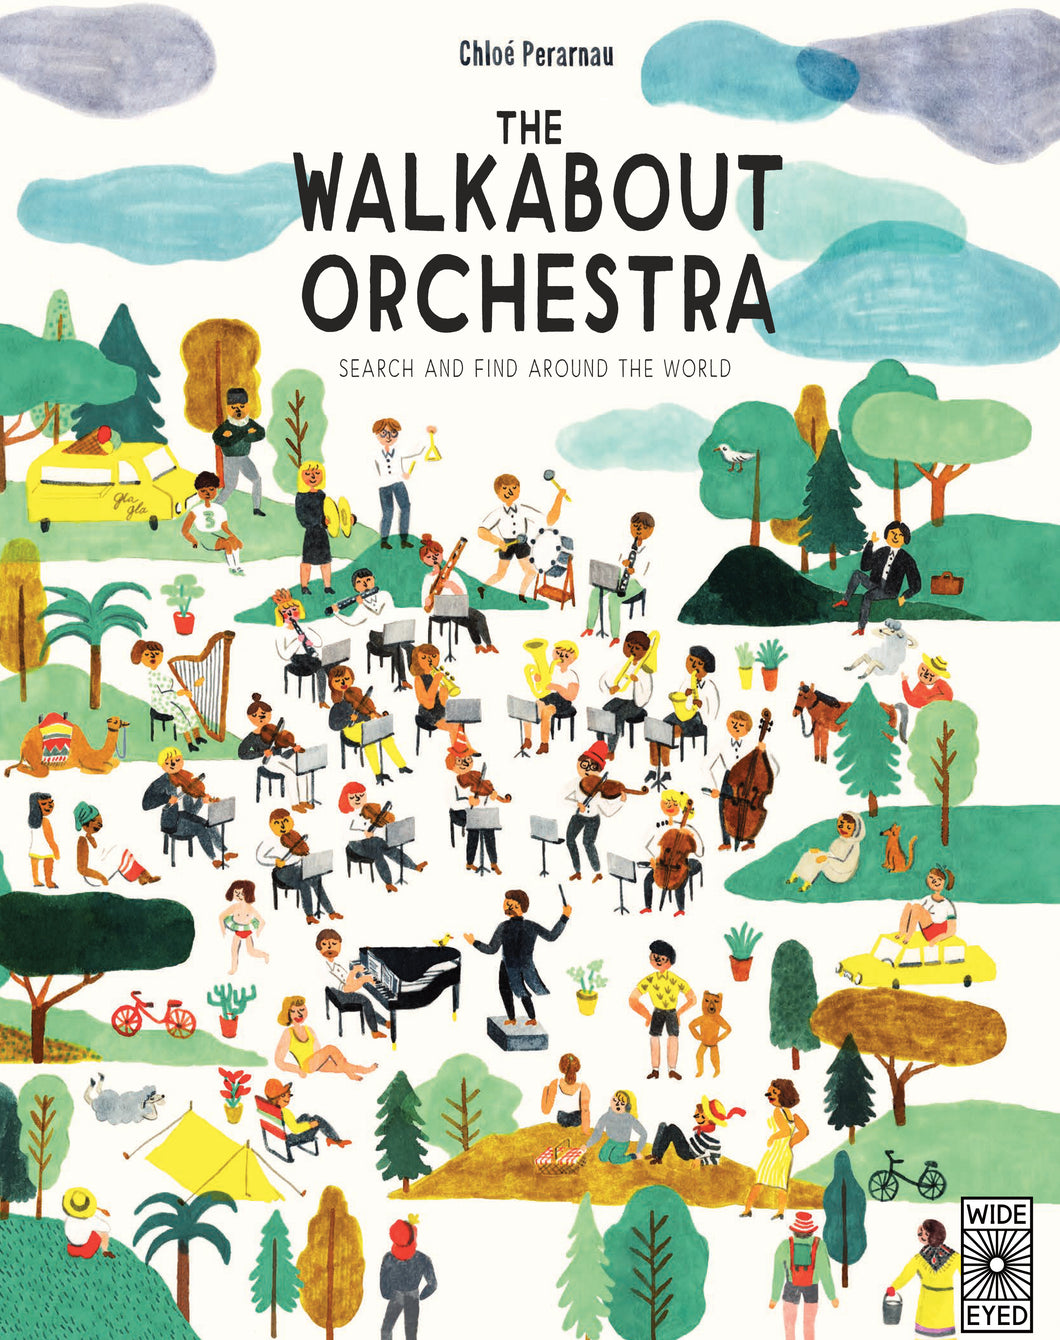 Walkabout Orchestra, The Postcards from around the world